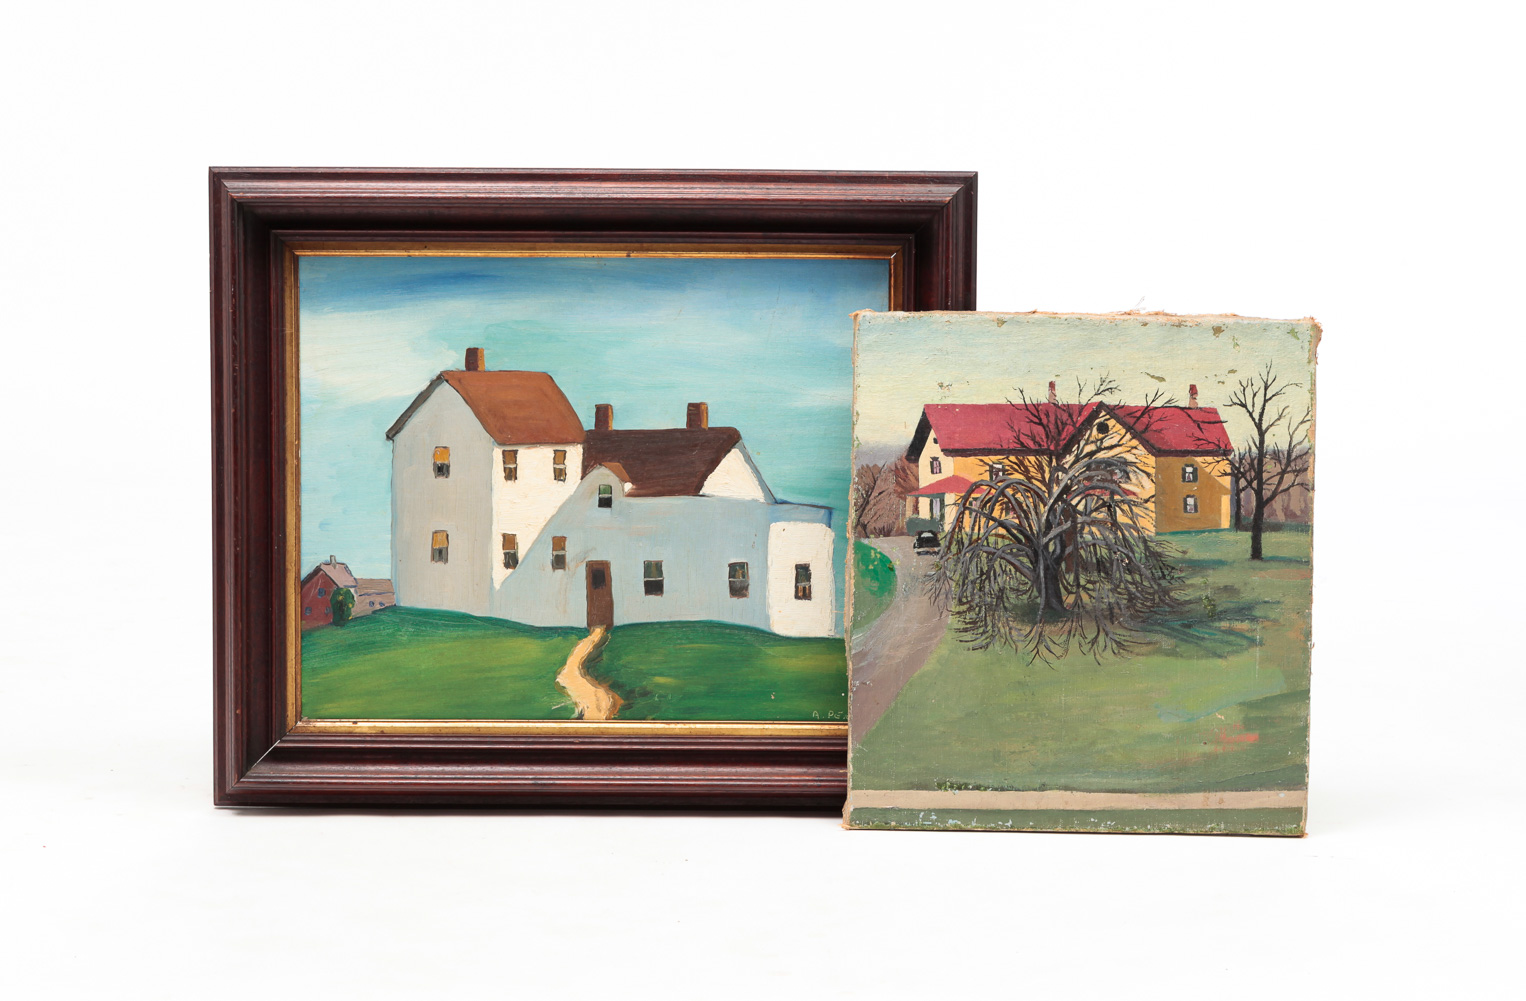 TWO AMERICAN PAINTINGS OF HOUSES. Mid